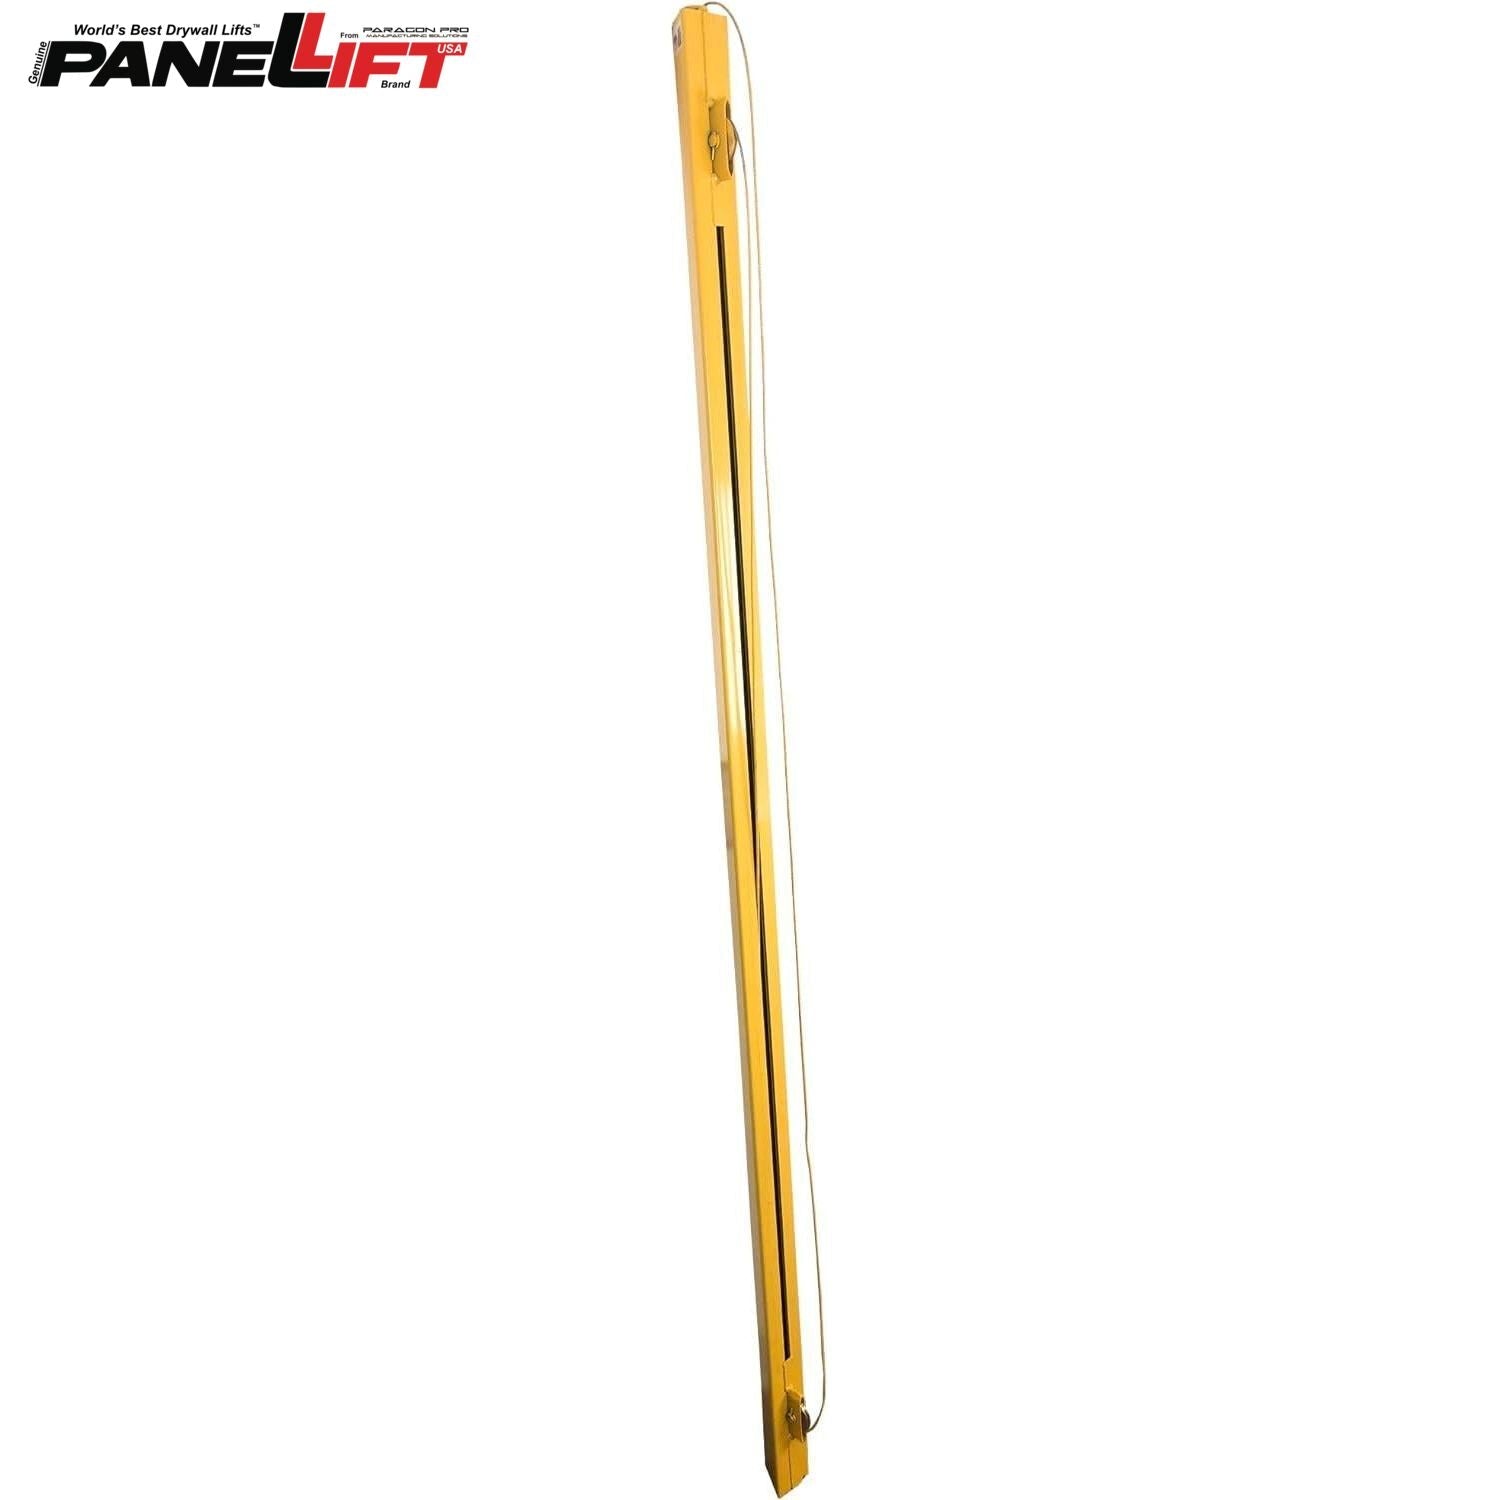 Panellift Model 186 - 00 4' Drywall Lift Height Extension - paragonpromfg